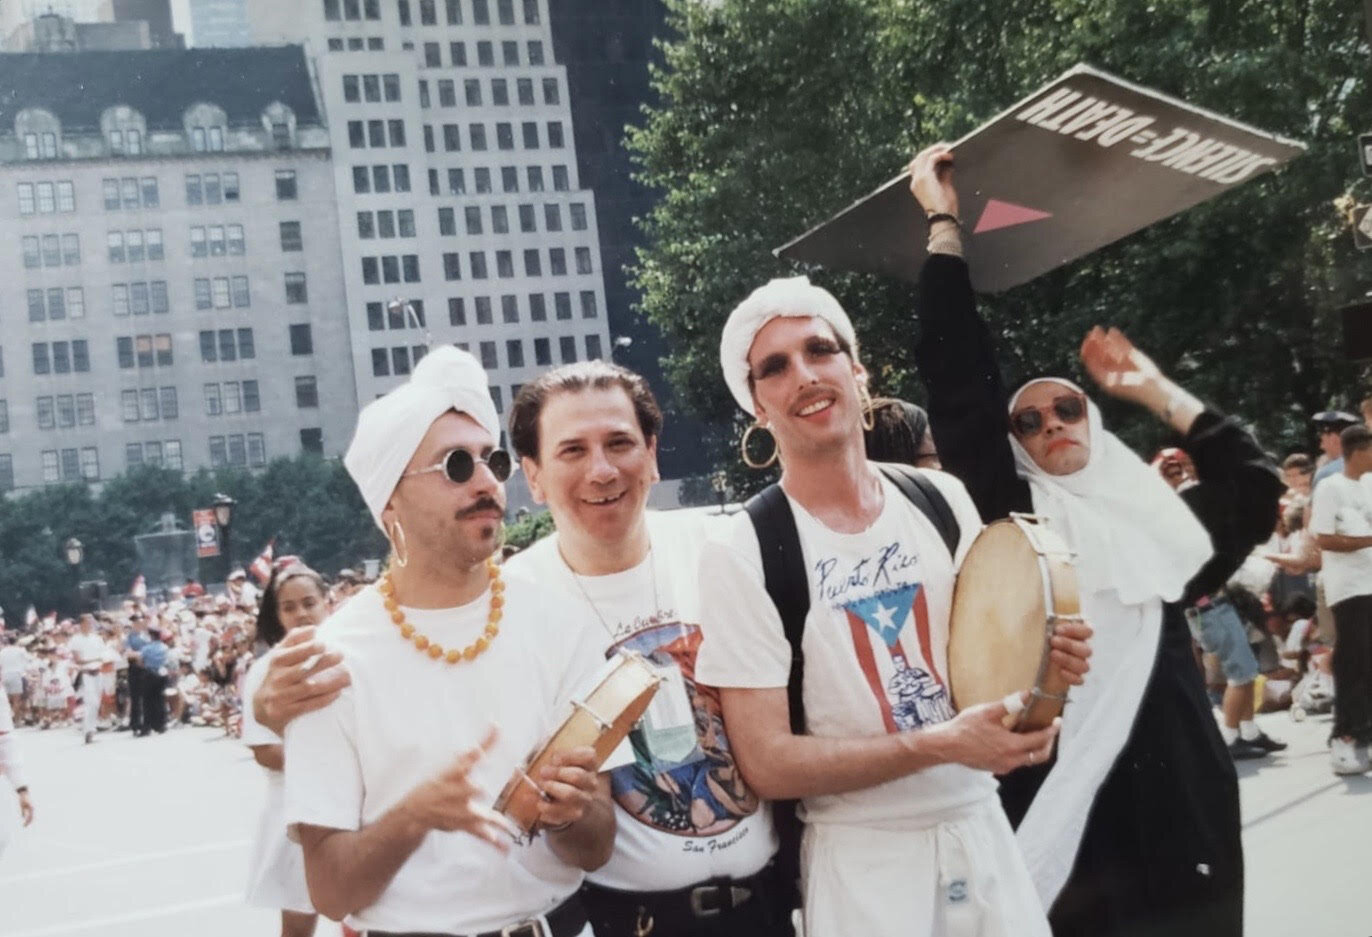  The Latina/o Caucus marched in the Puerto Rican Day parade in June of 1990. It was the first HIV/AIDS organization to participate and it was met with controversy from organizers and cheers from the public.&nbsp; 